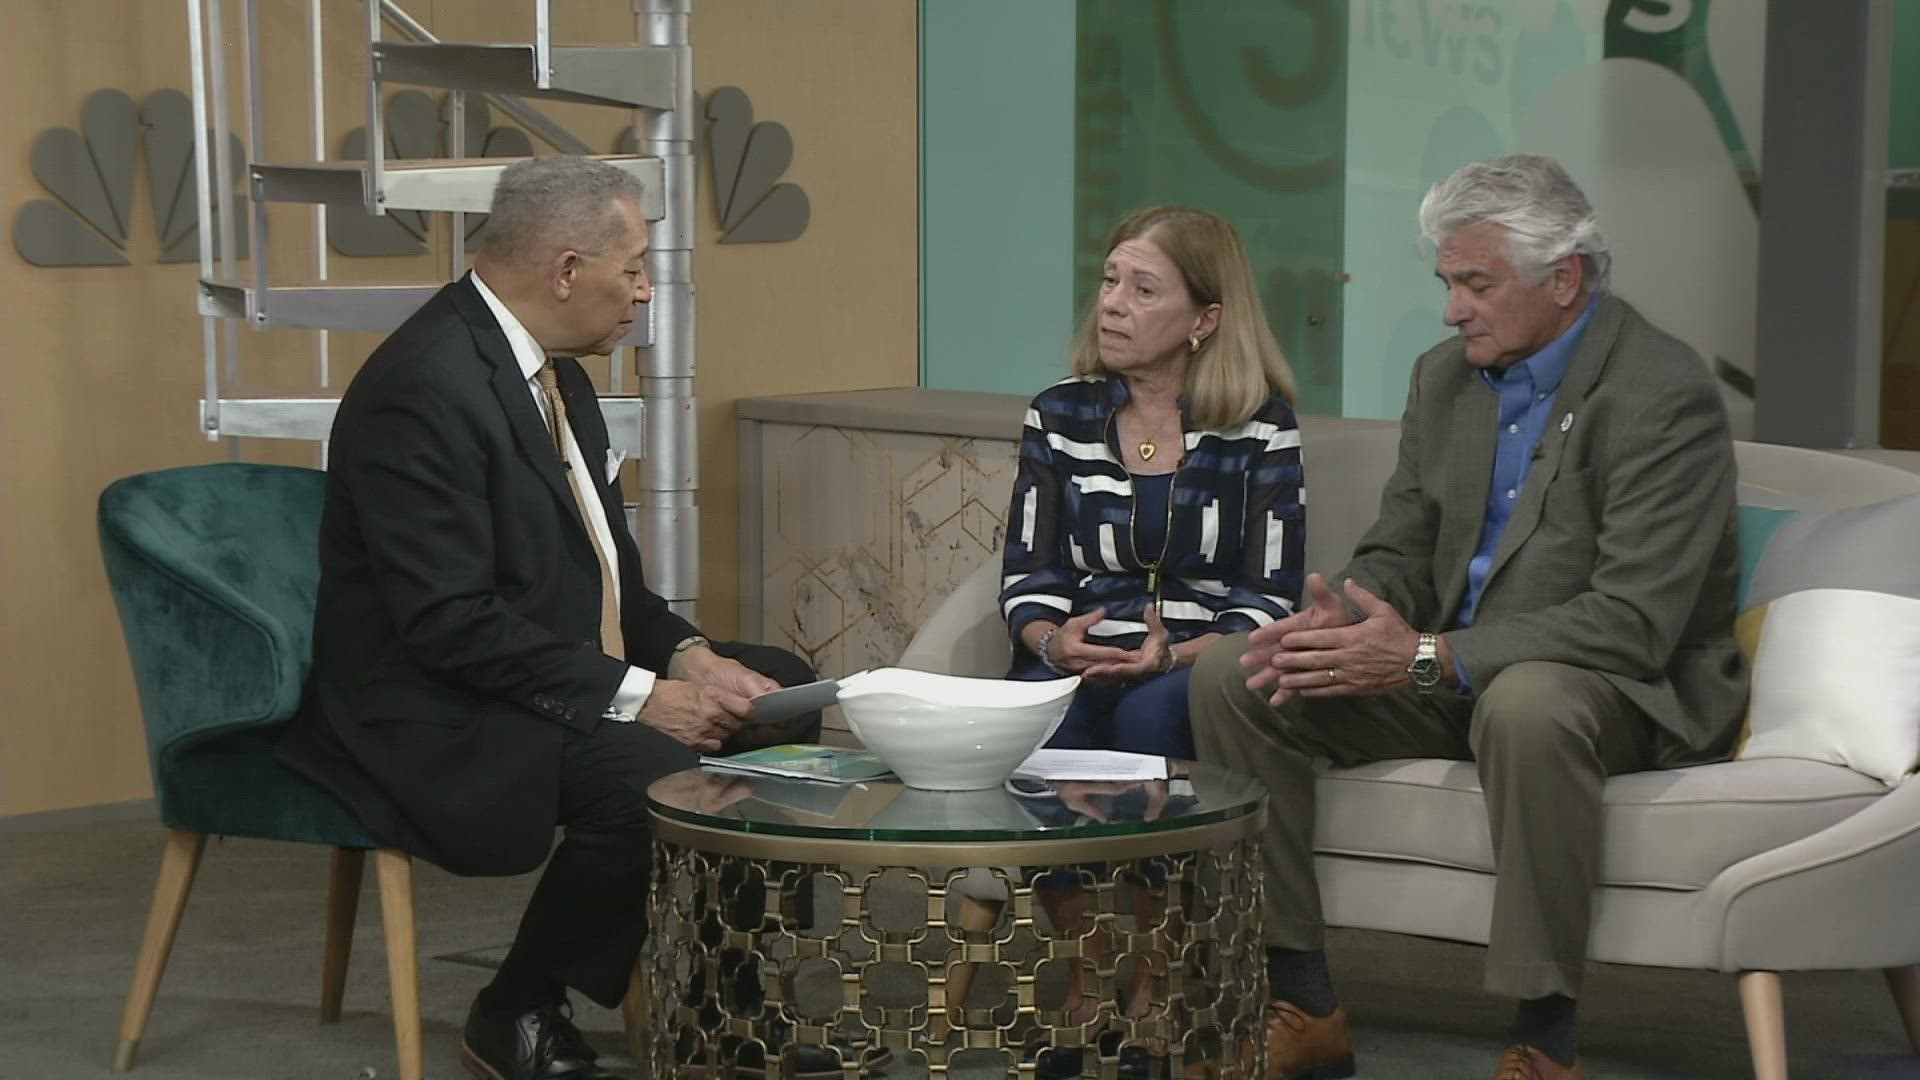 Leon is speaking with Barbara Oldham & John Schluep about the work they do to support and tribute veterens.